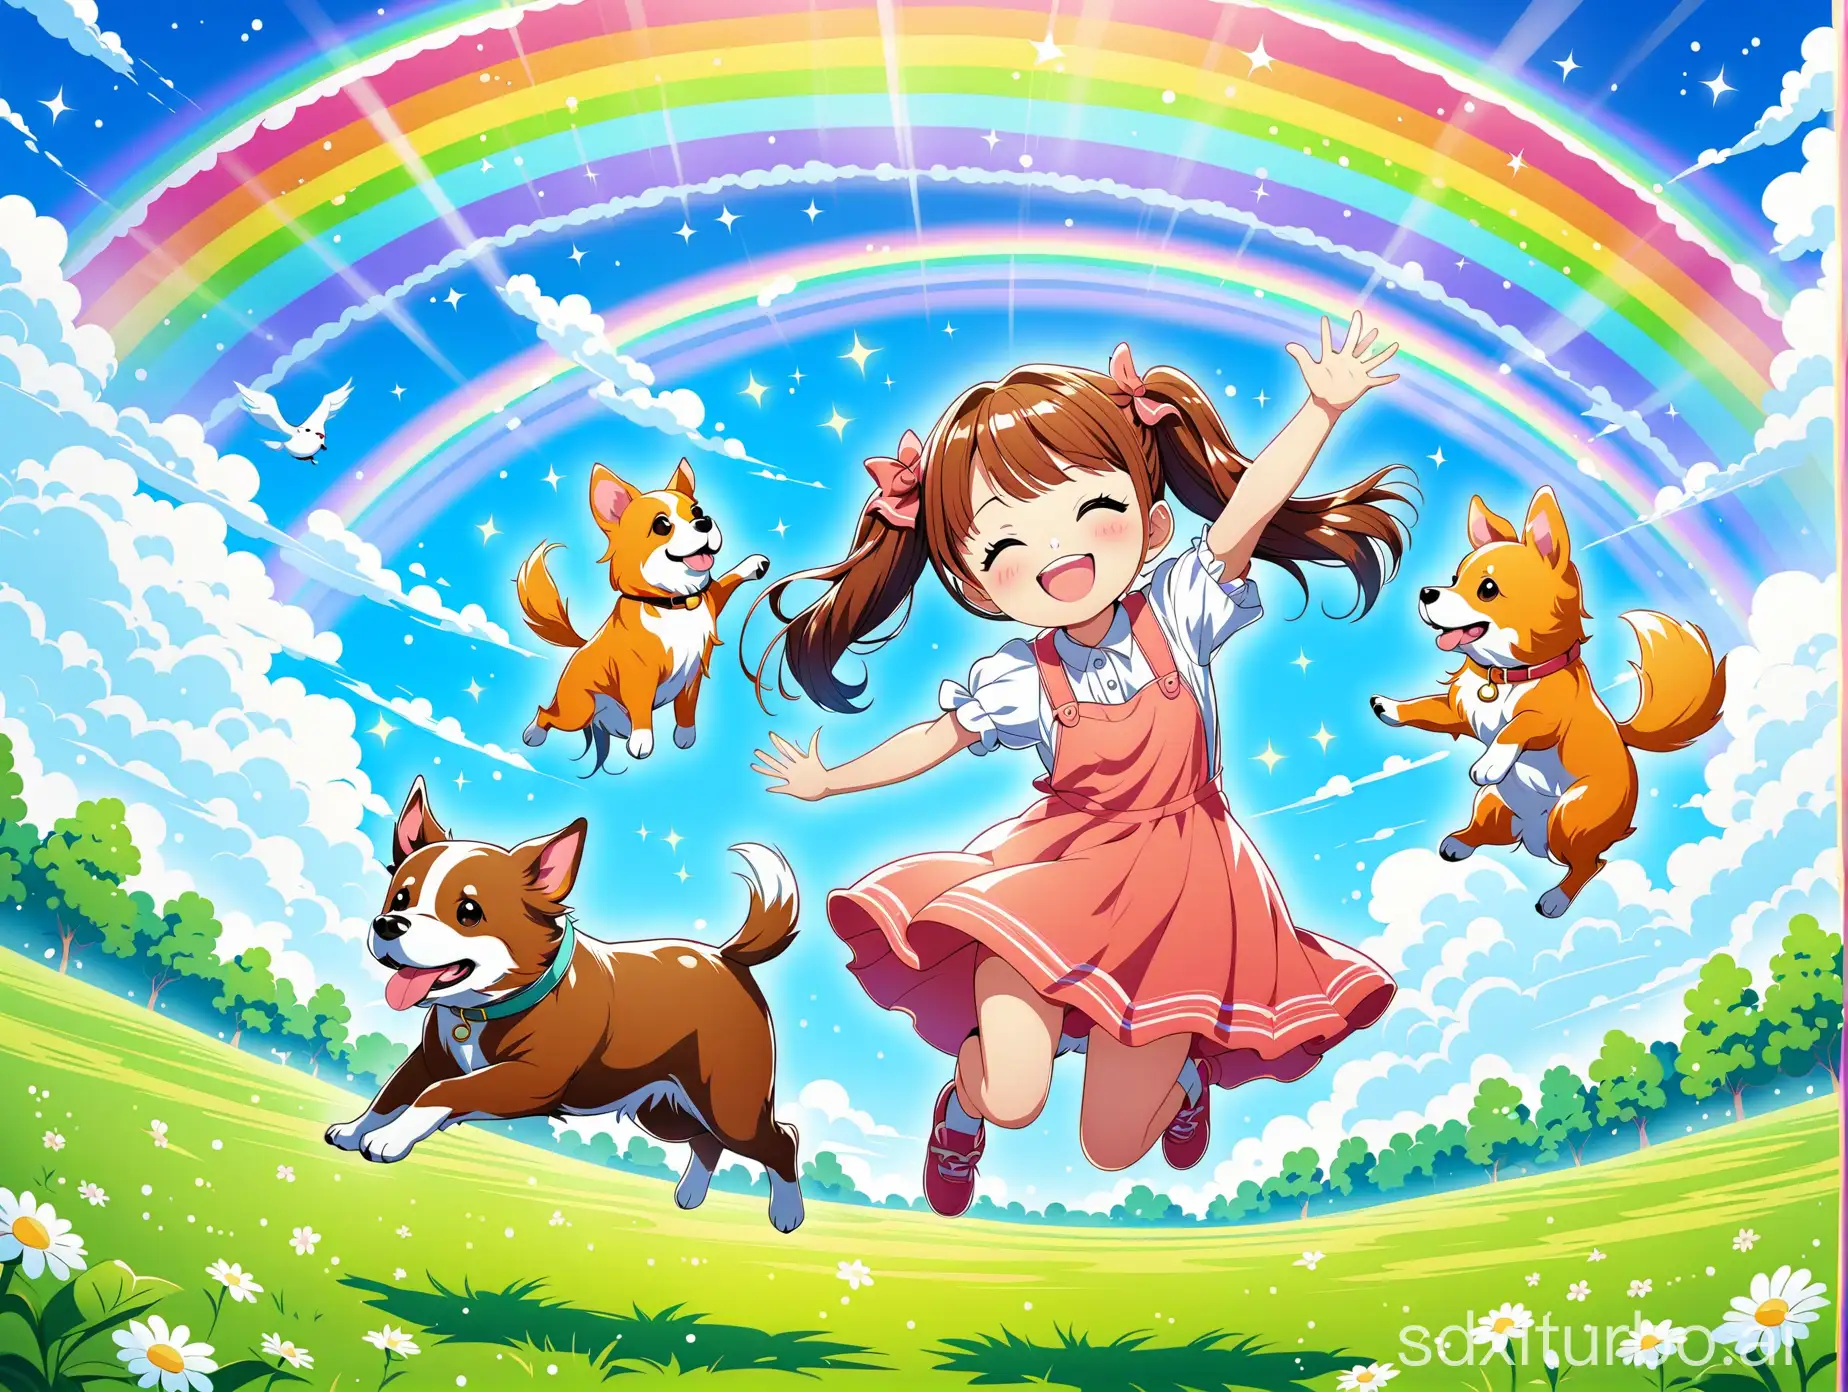 a happy girl with pigtails under the rainbow with a jumping dog around her